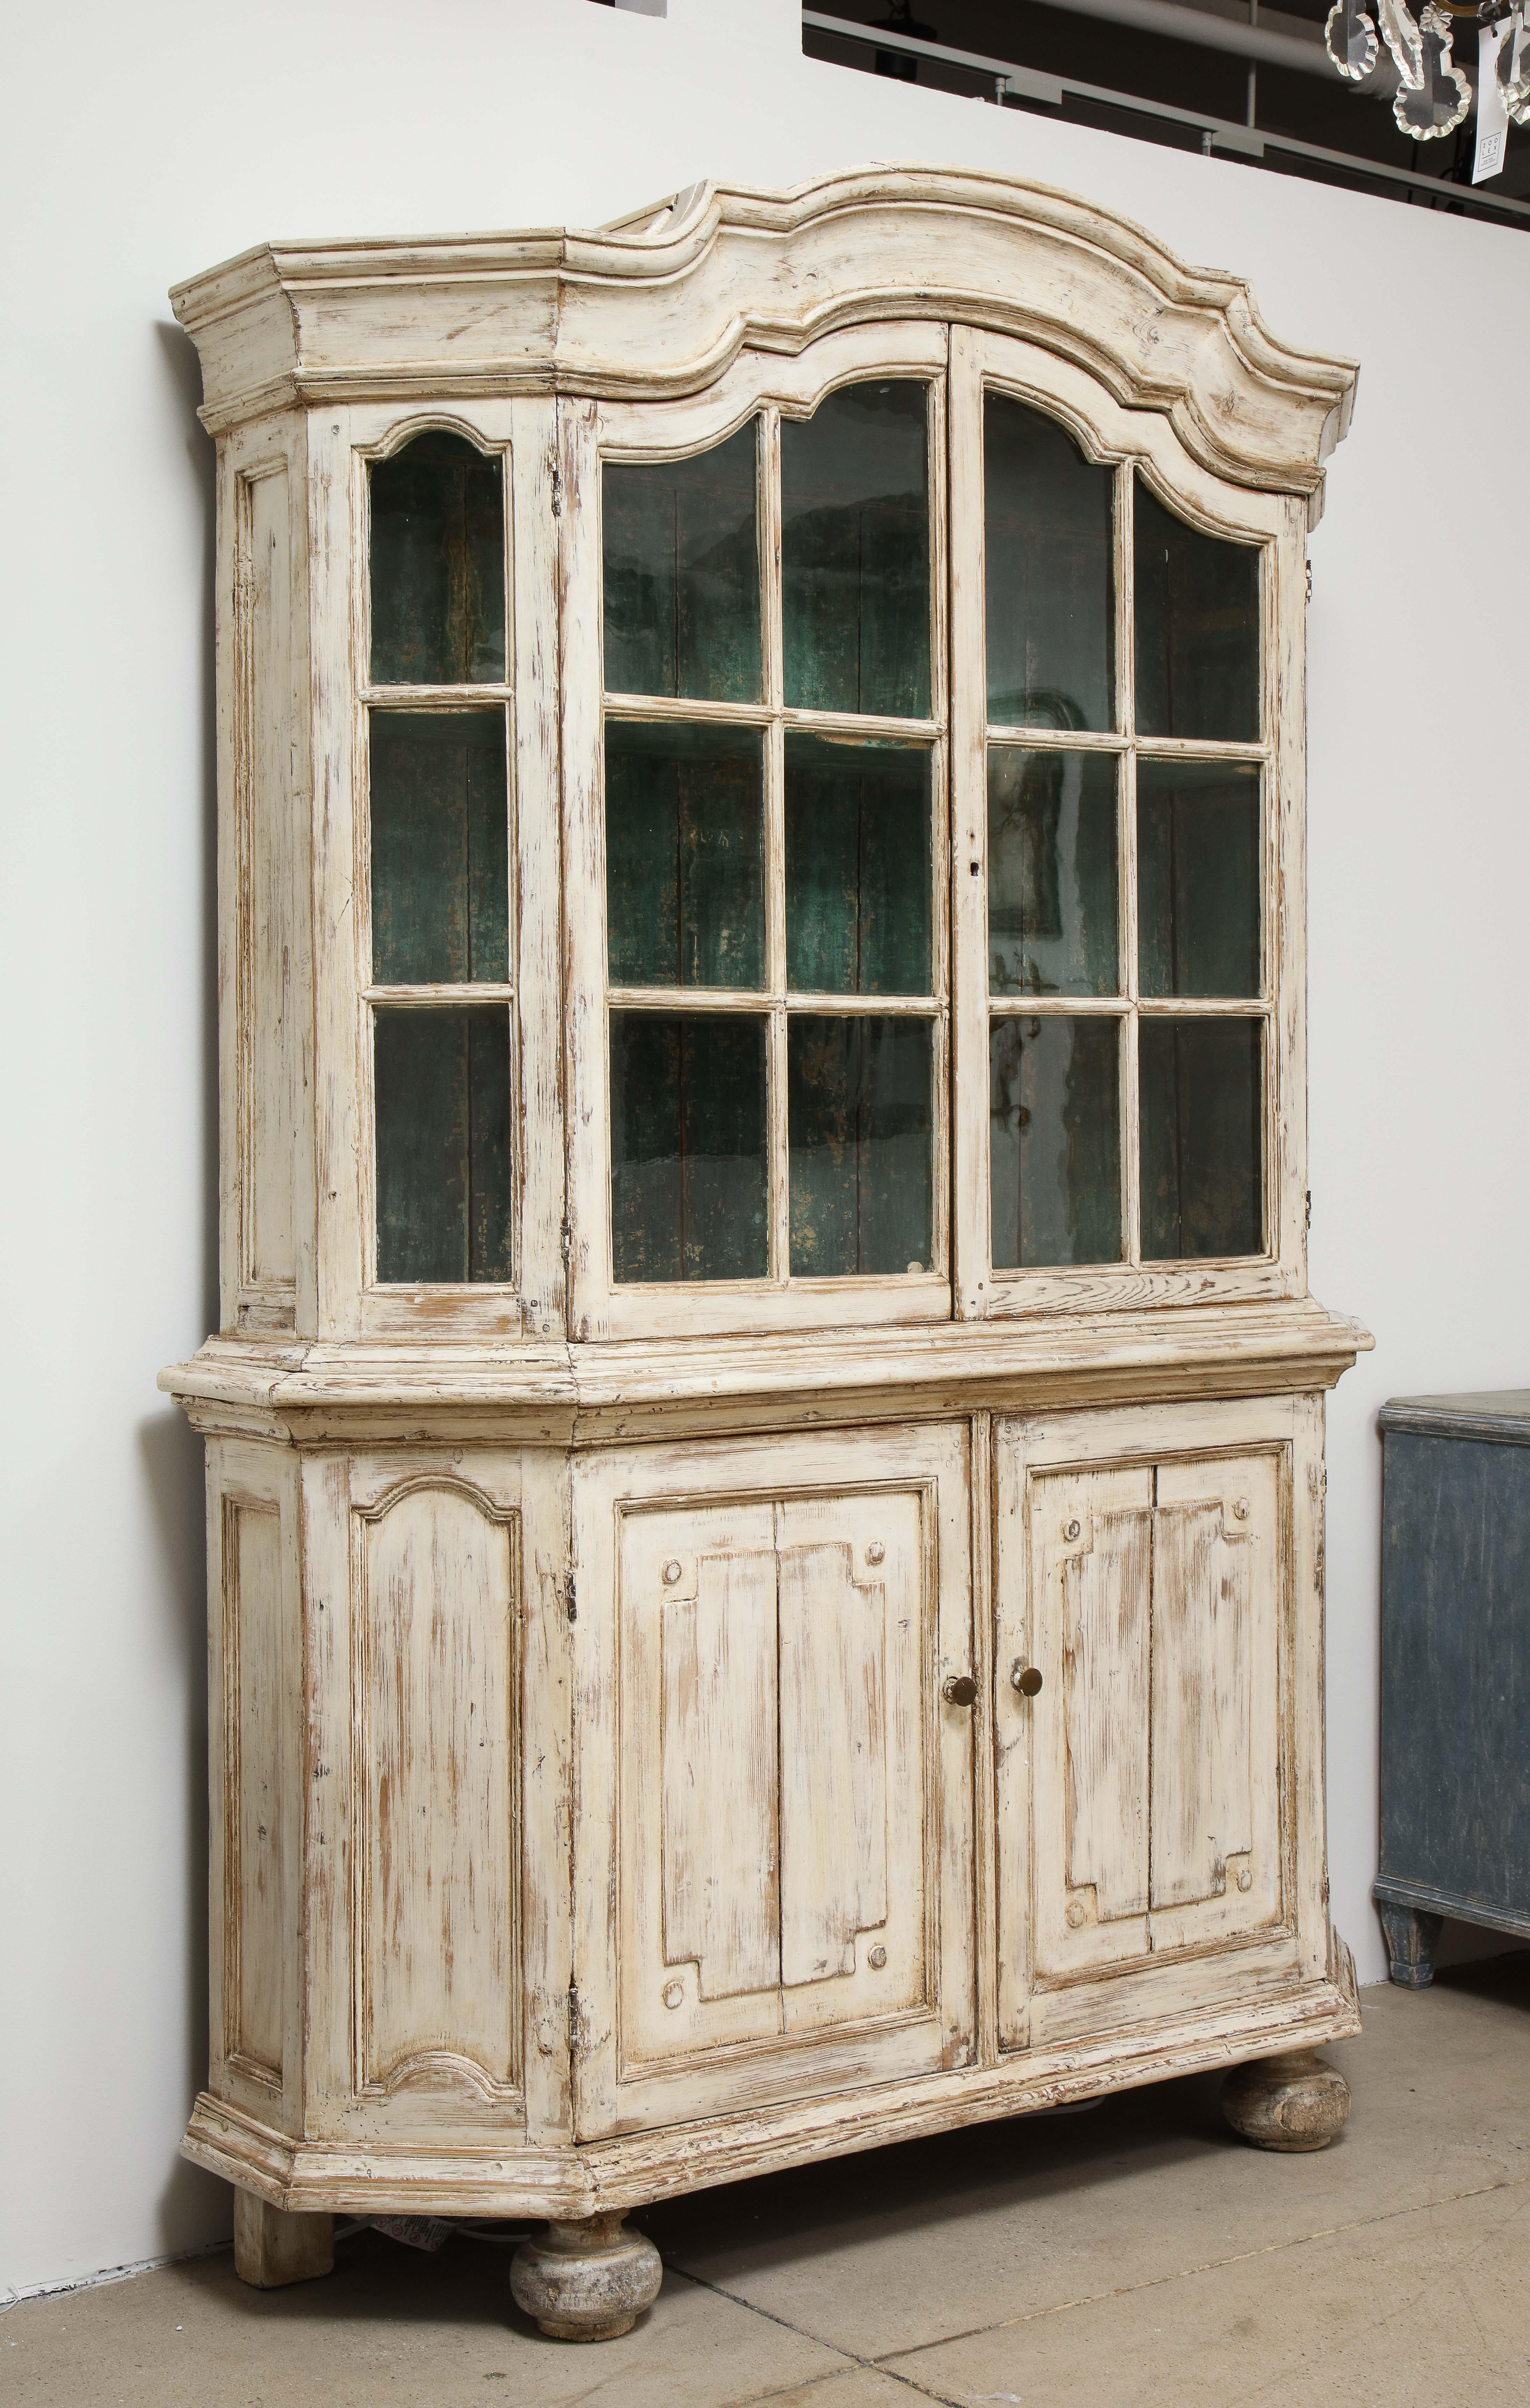 An antique Swedish vitrine in the Gustavian style painted in an ivory color. The top features glazed doors with glazed side panels and a green painted interior. The base has two doors that open to reveal a single shelf. The base rests on bun feet.